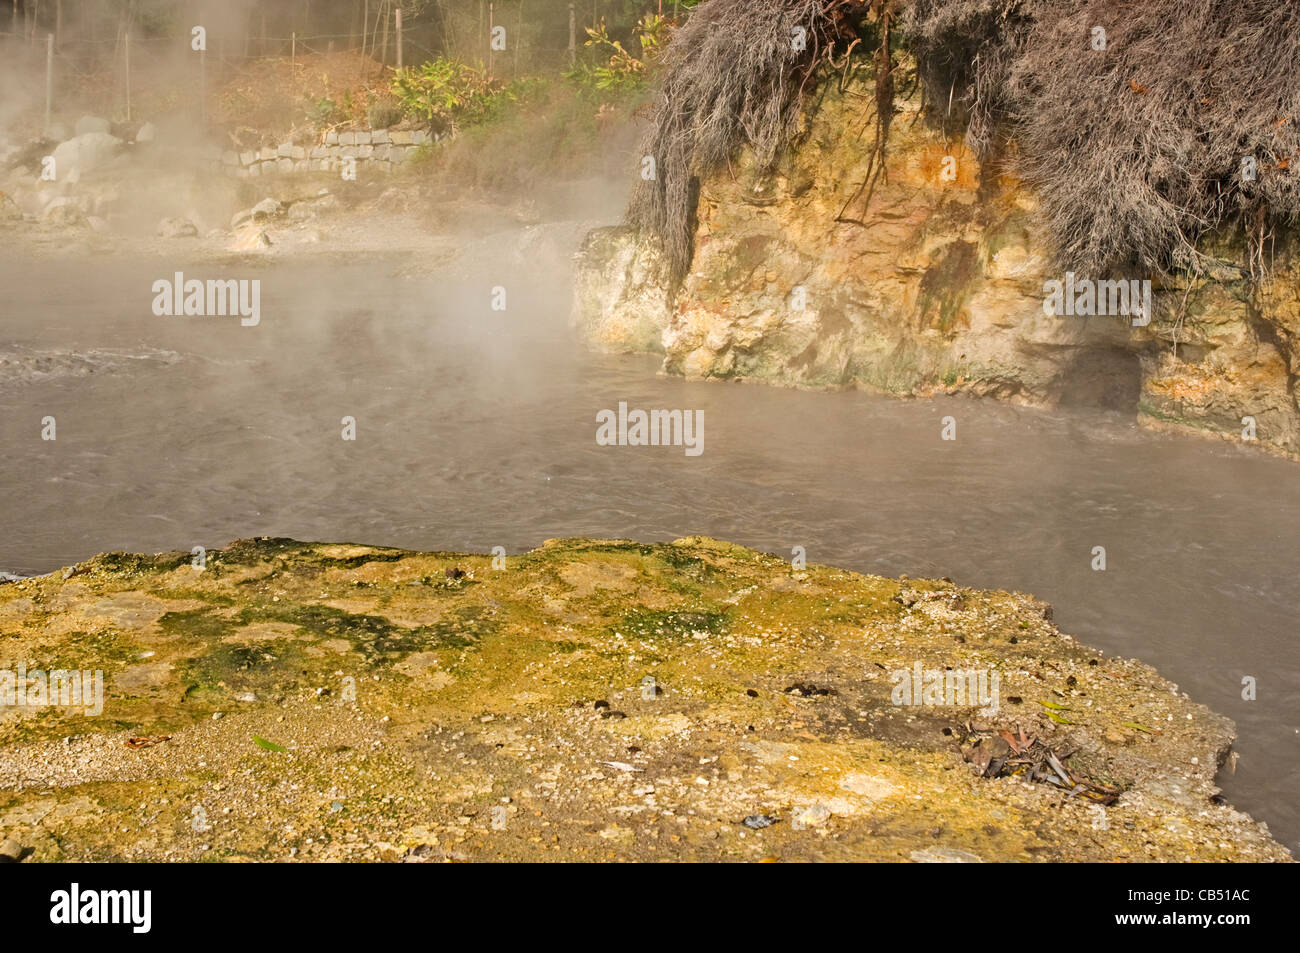 EUROPE PORTUGAL AZORES São Miguel Lagoa das Furnas bubbling mud pool showing geothermal activity Stock Photo